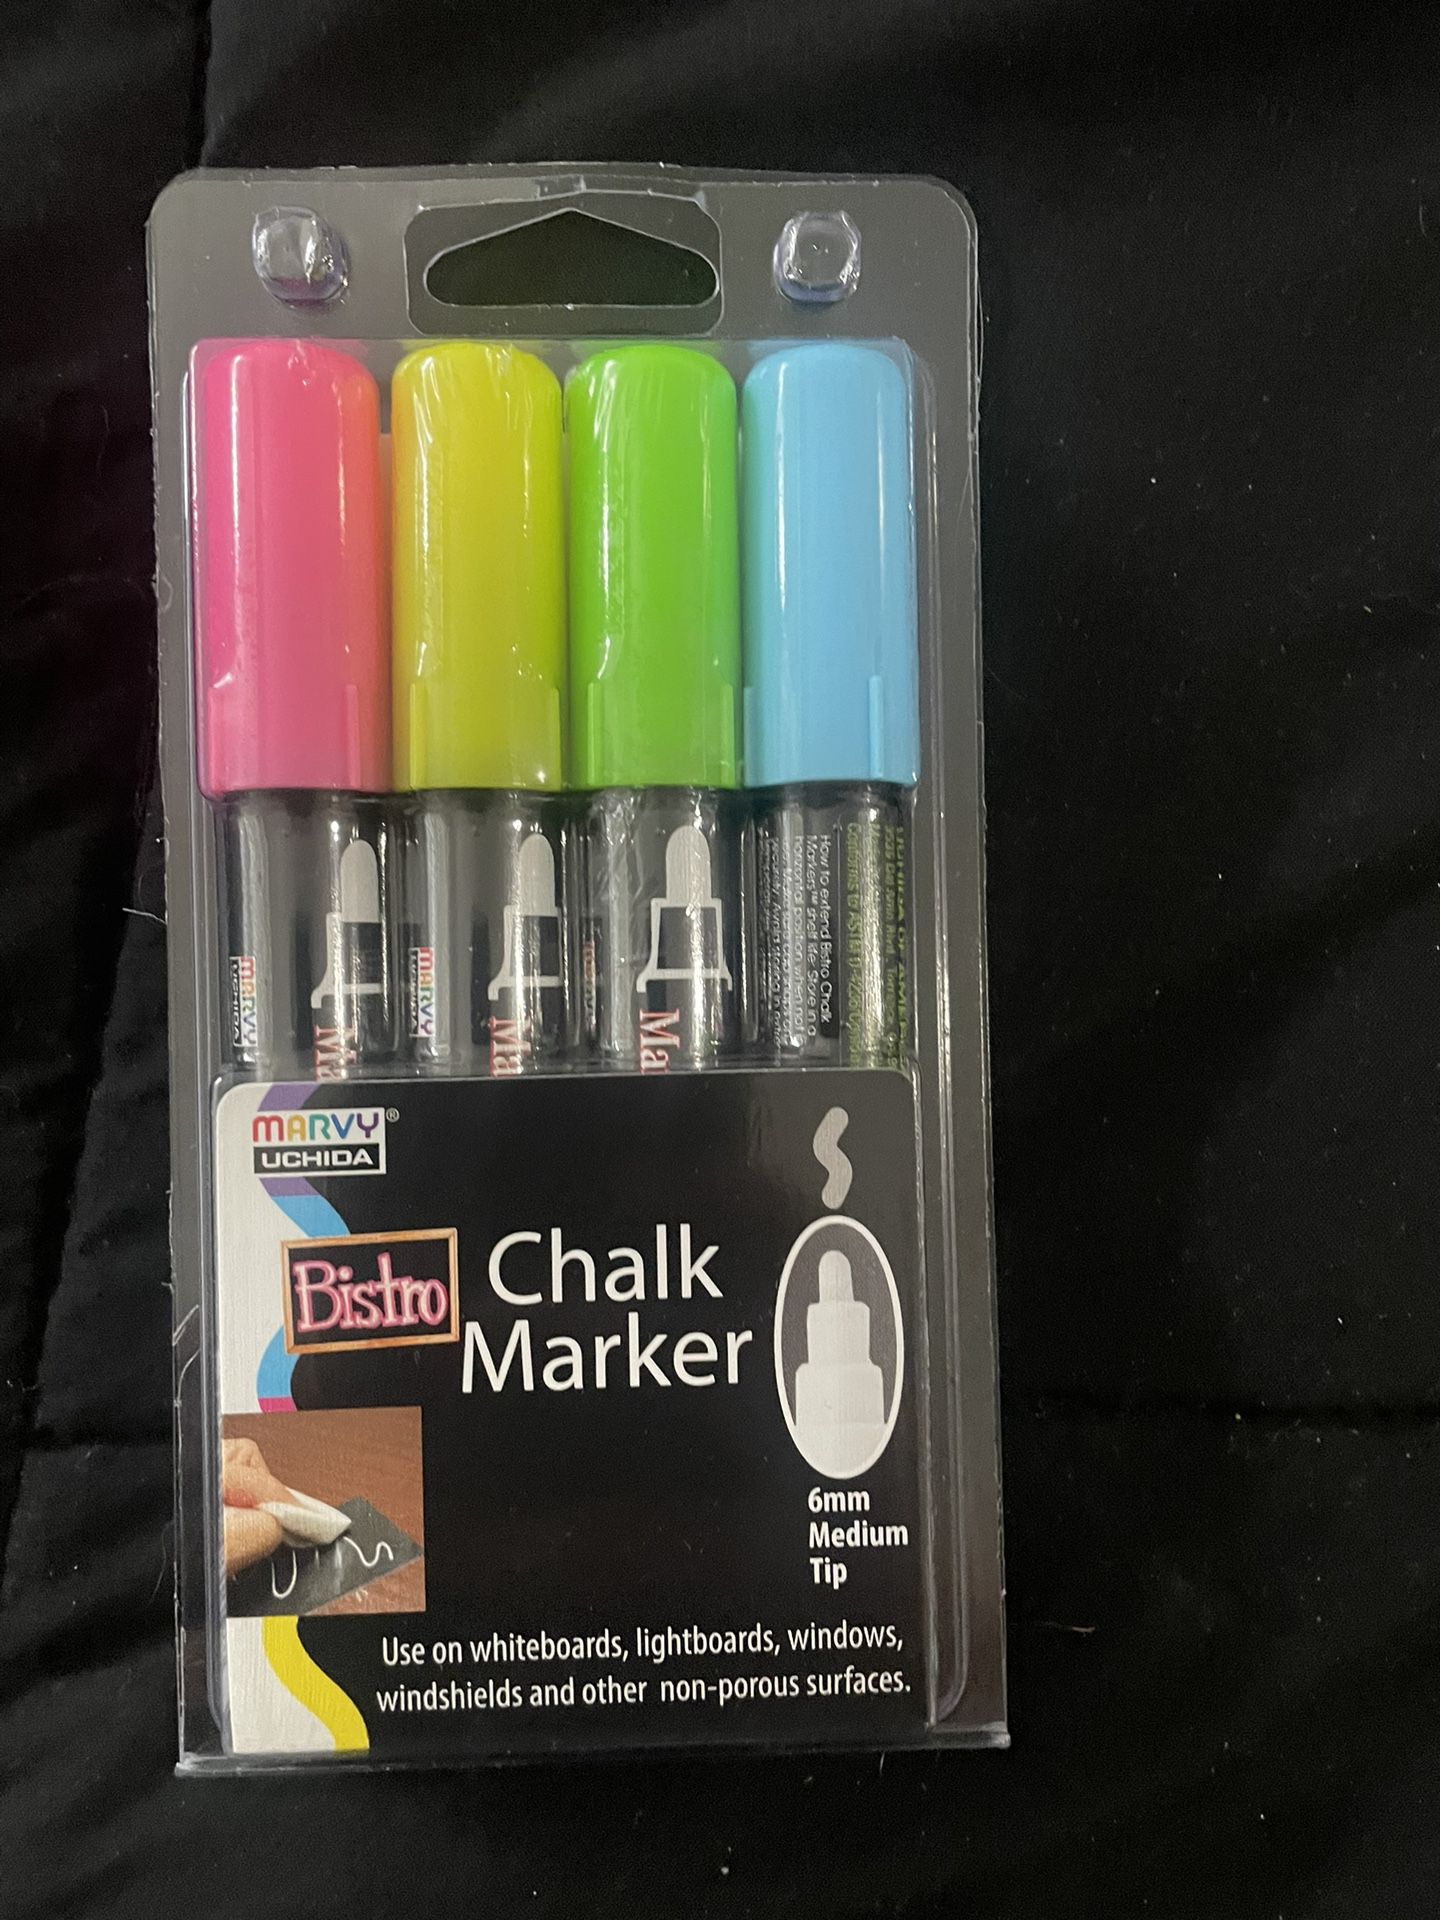 Chalk Markers Never Opened 